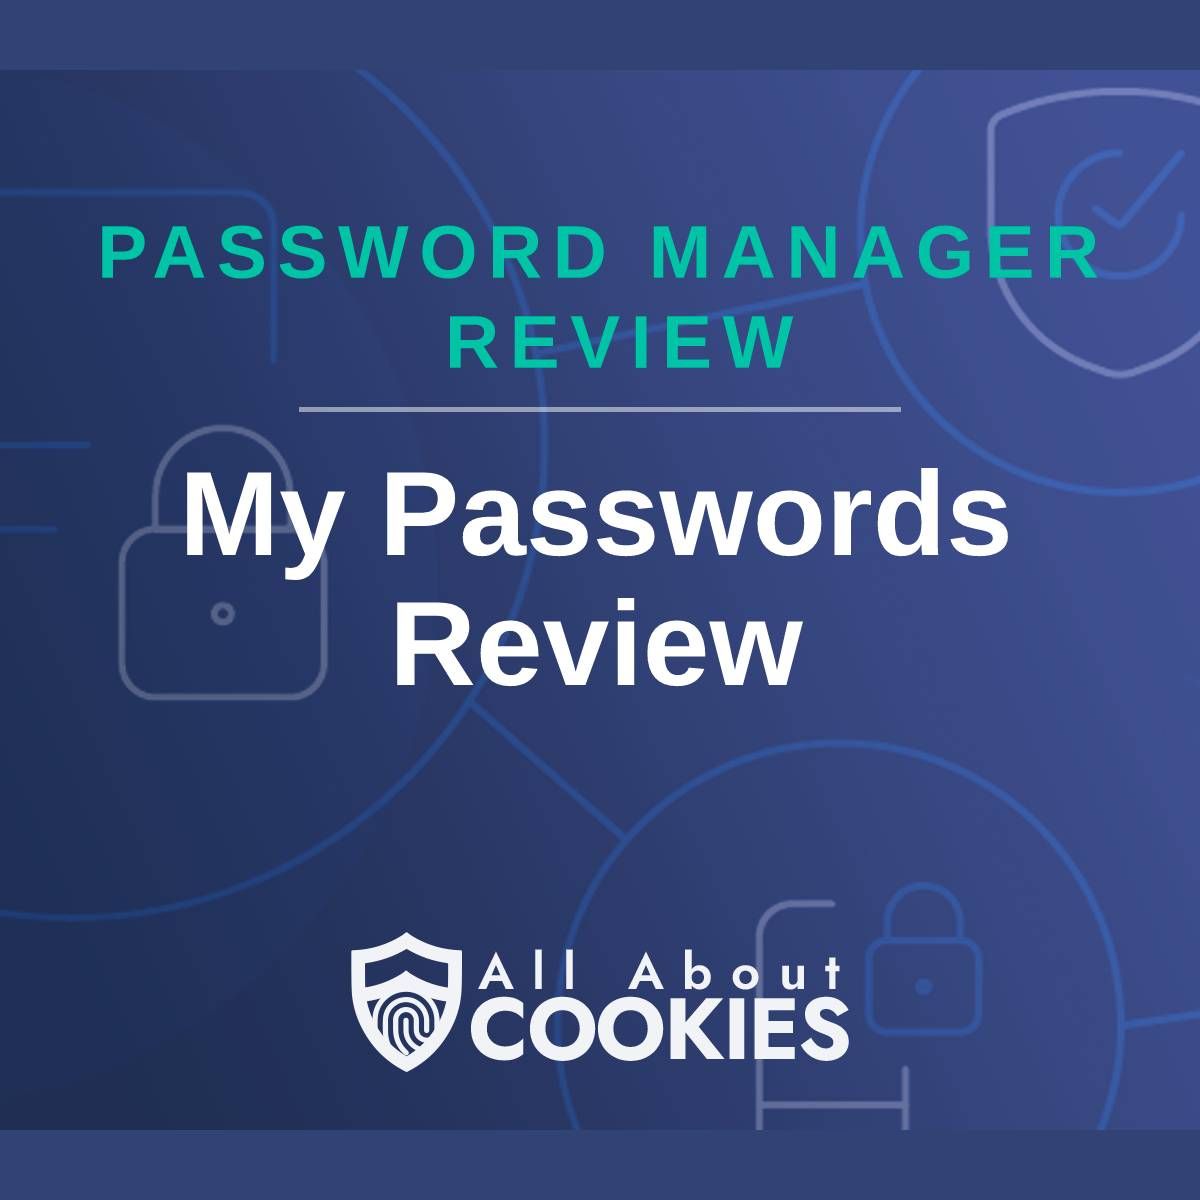 A blue background with images of locks and shields with the text &quot;Password Manager Review My Passwords Review&quot; and the All About Cookies logo. 